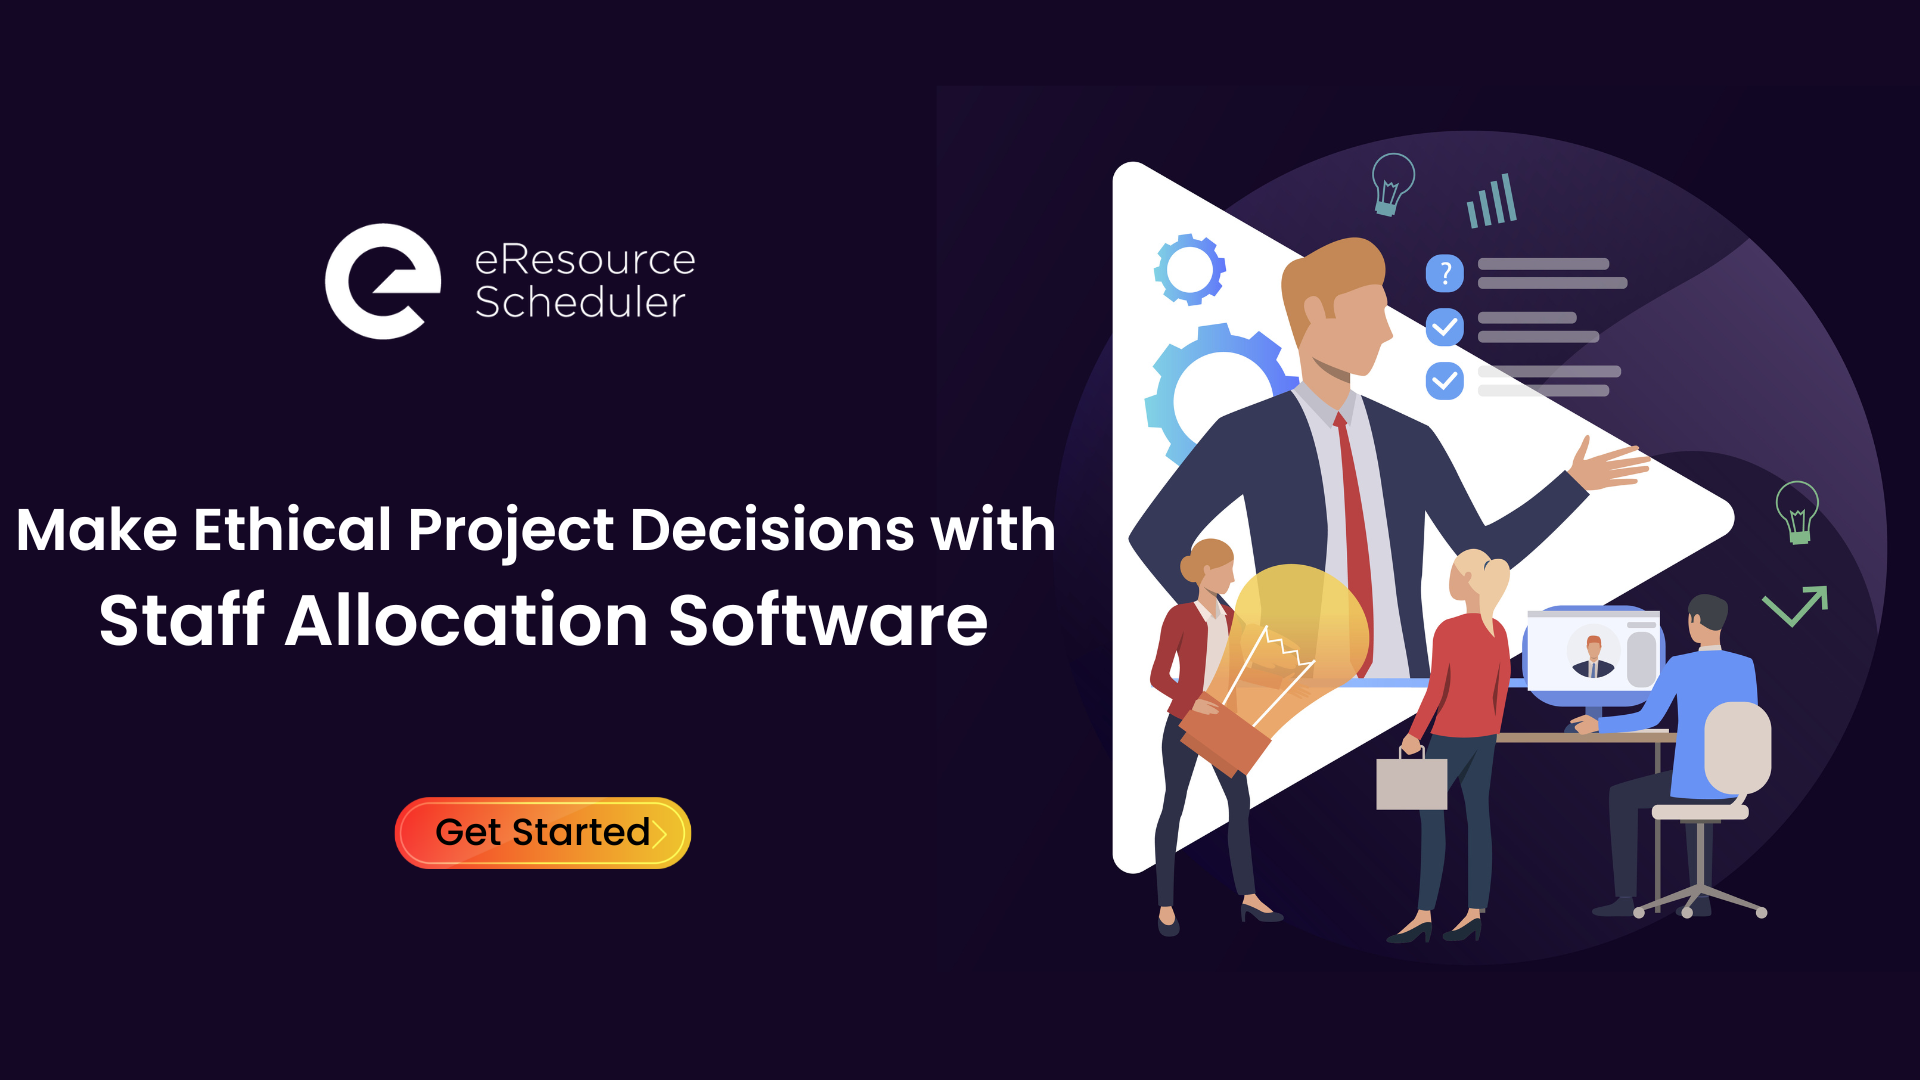  Make Ethical Project Decisions With Staff Allocation Software